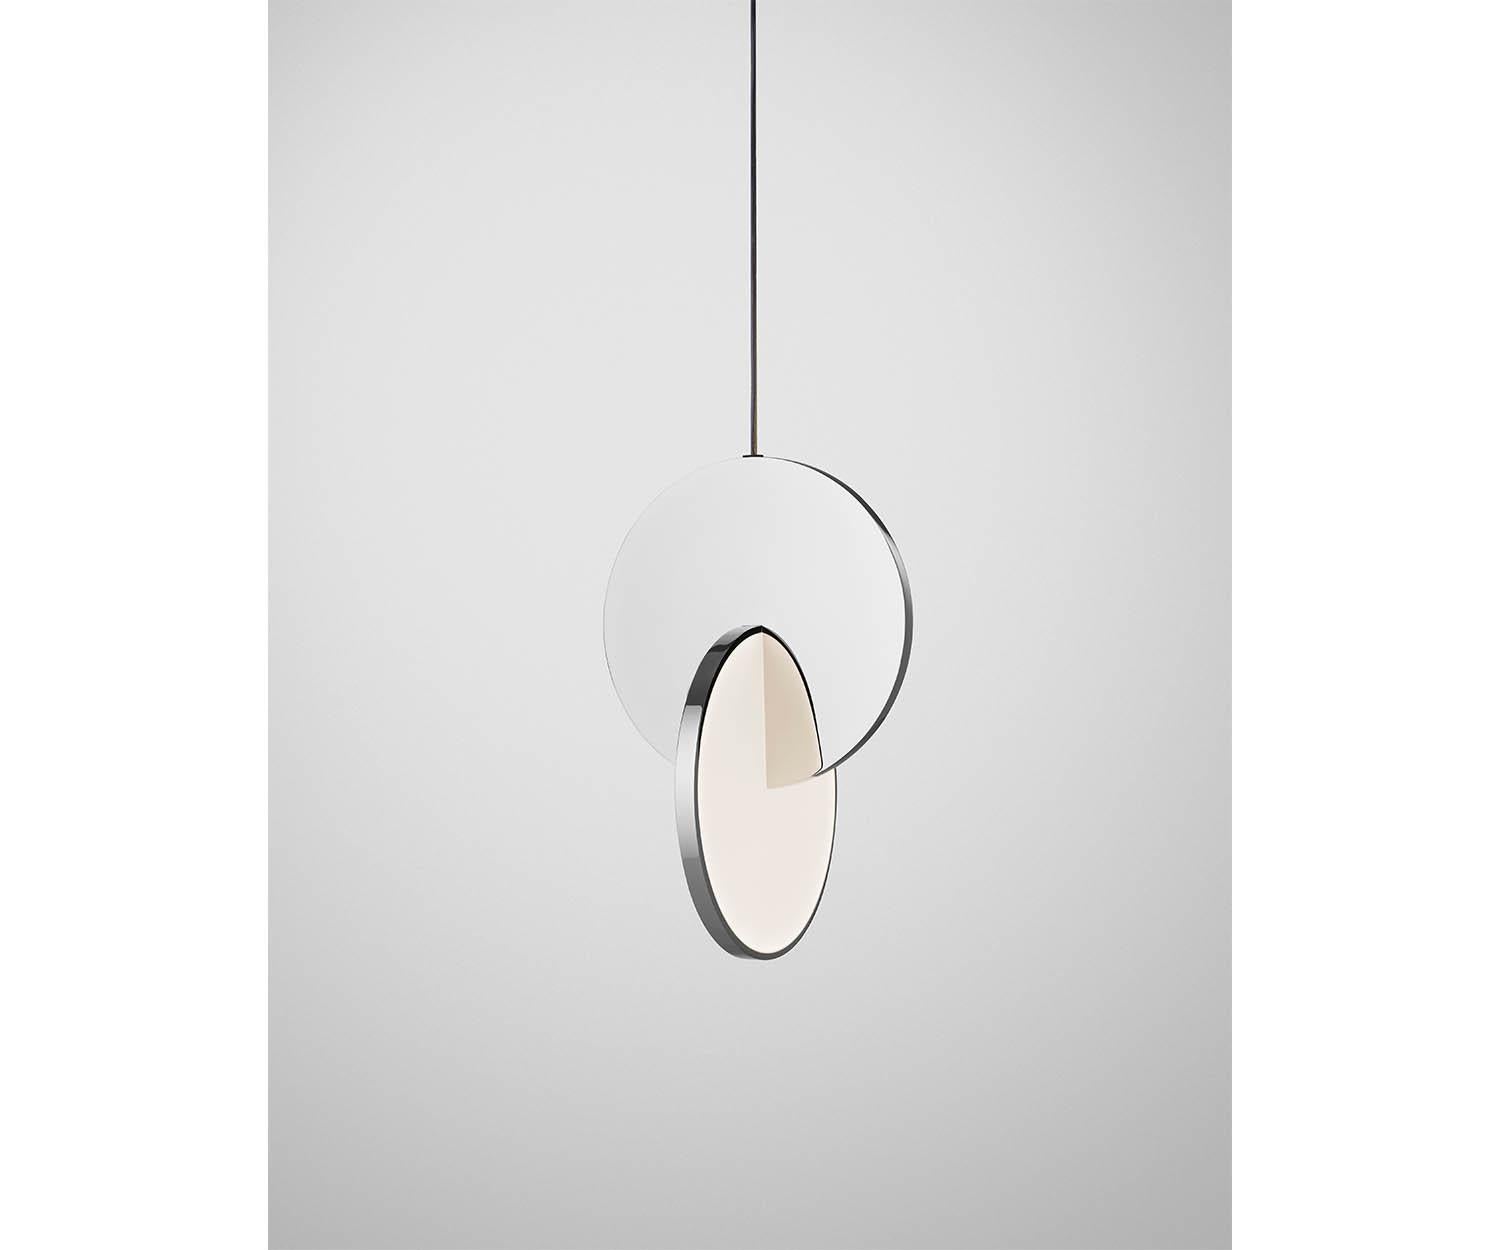 Eclipse pendant is celestial in both its name and inspiration. Mirror-polished chrome and acrylic discs interact, dissect and obscure, which both eclipses and reveals its illumination to the viewer at the same time. Eclipse has been produced as a